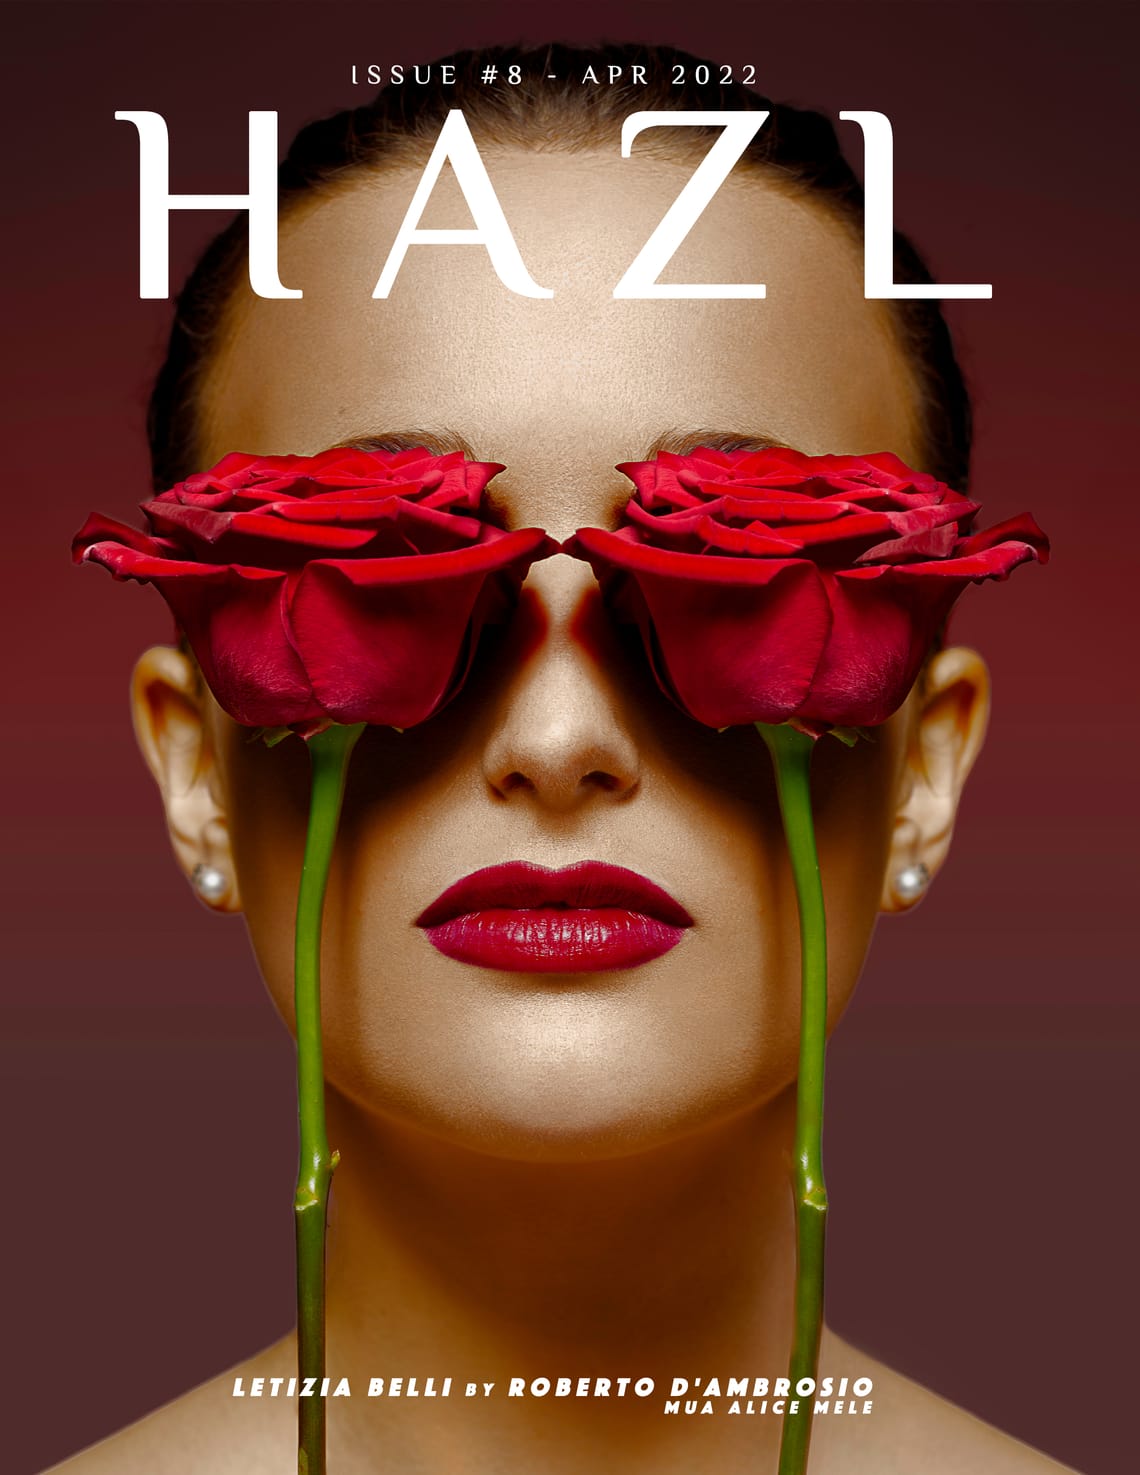 HAZL Magazine Issue #8 -  April 2022 Launched Worldwide